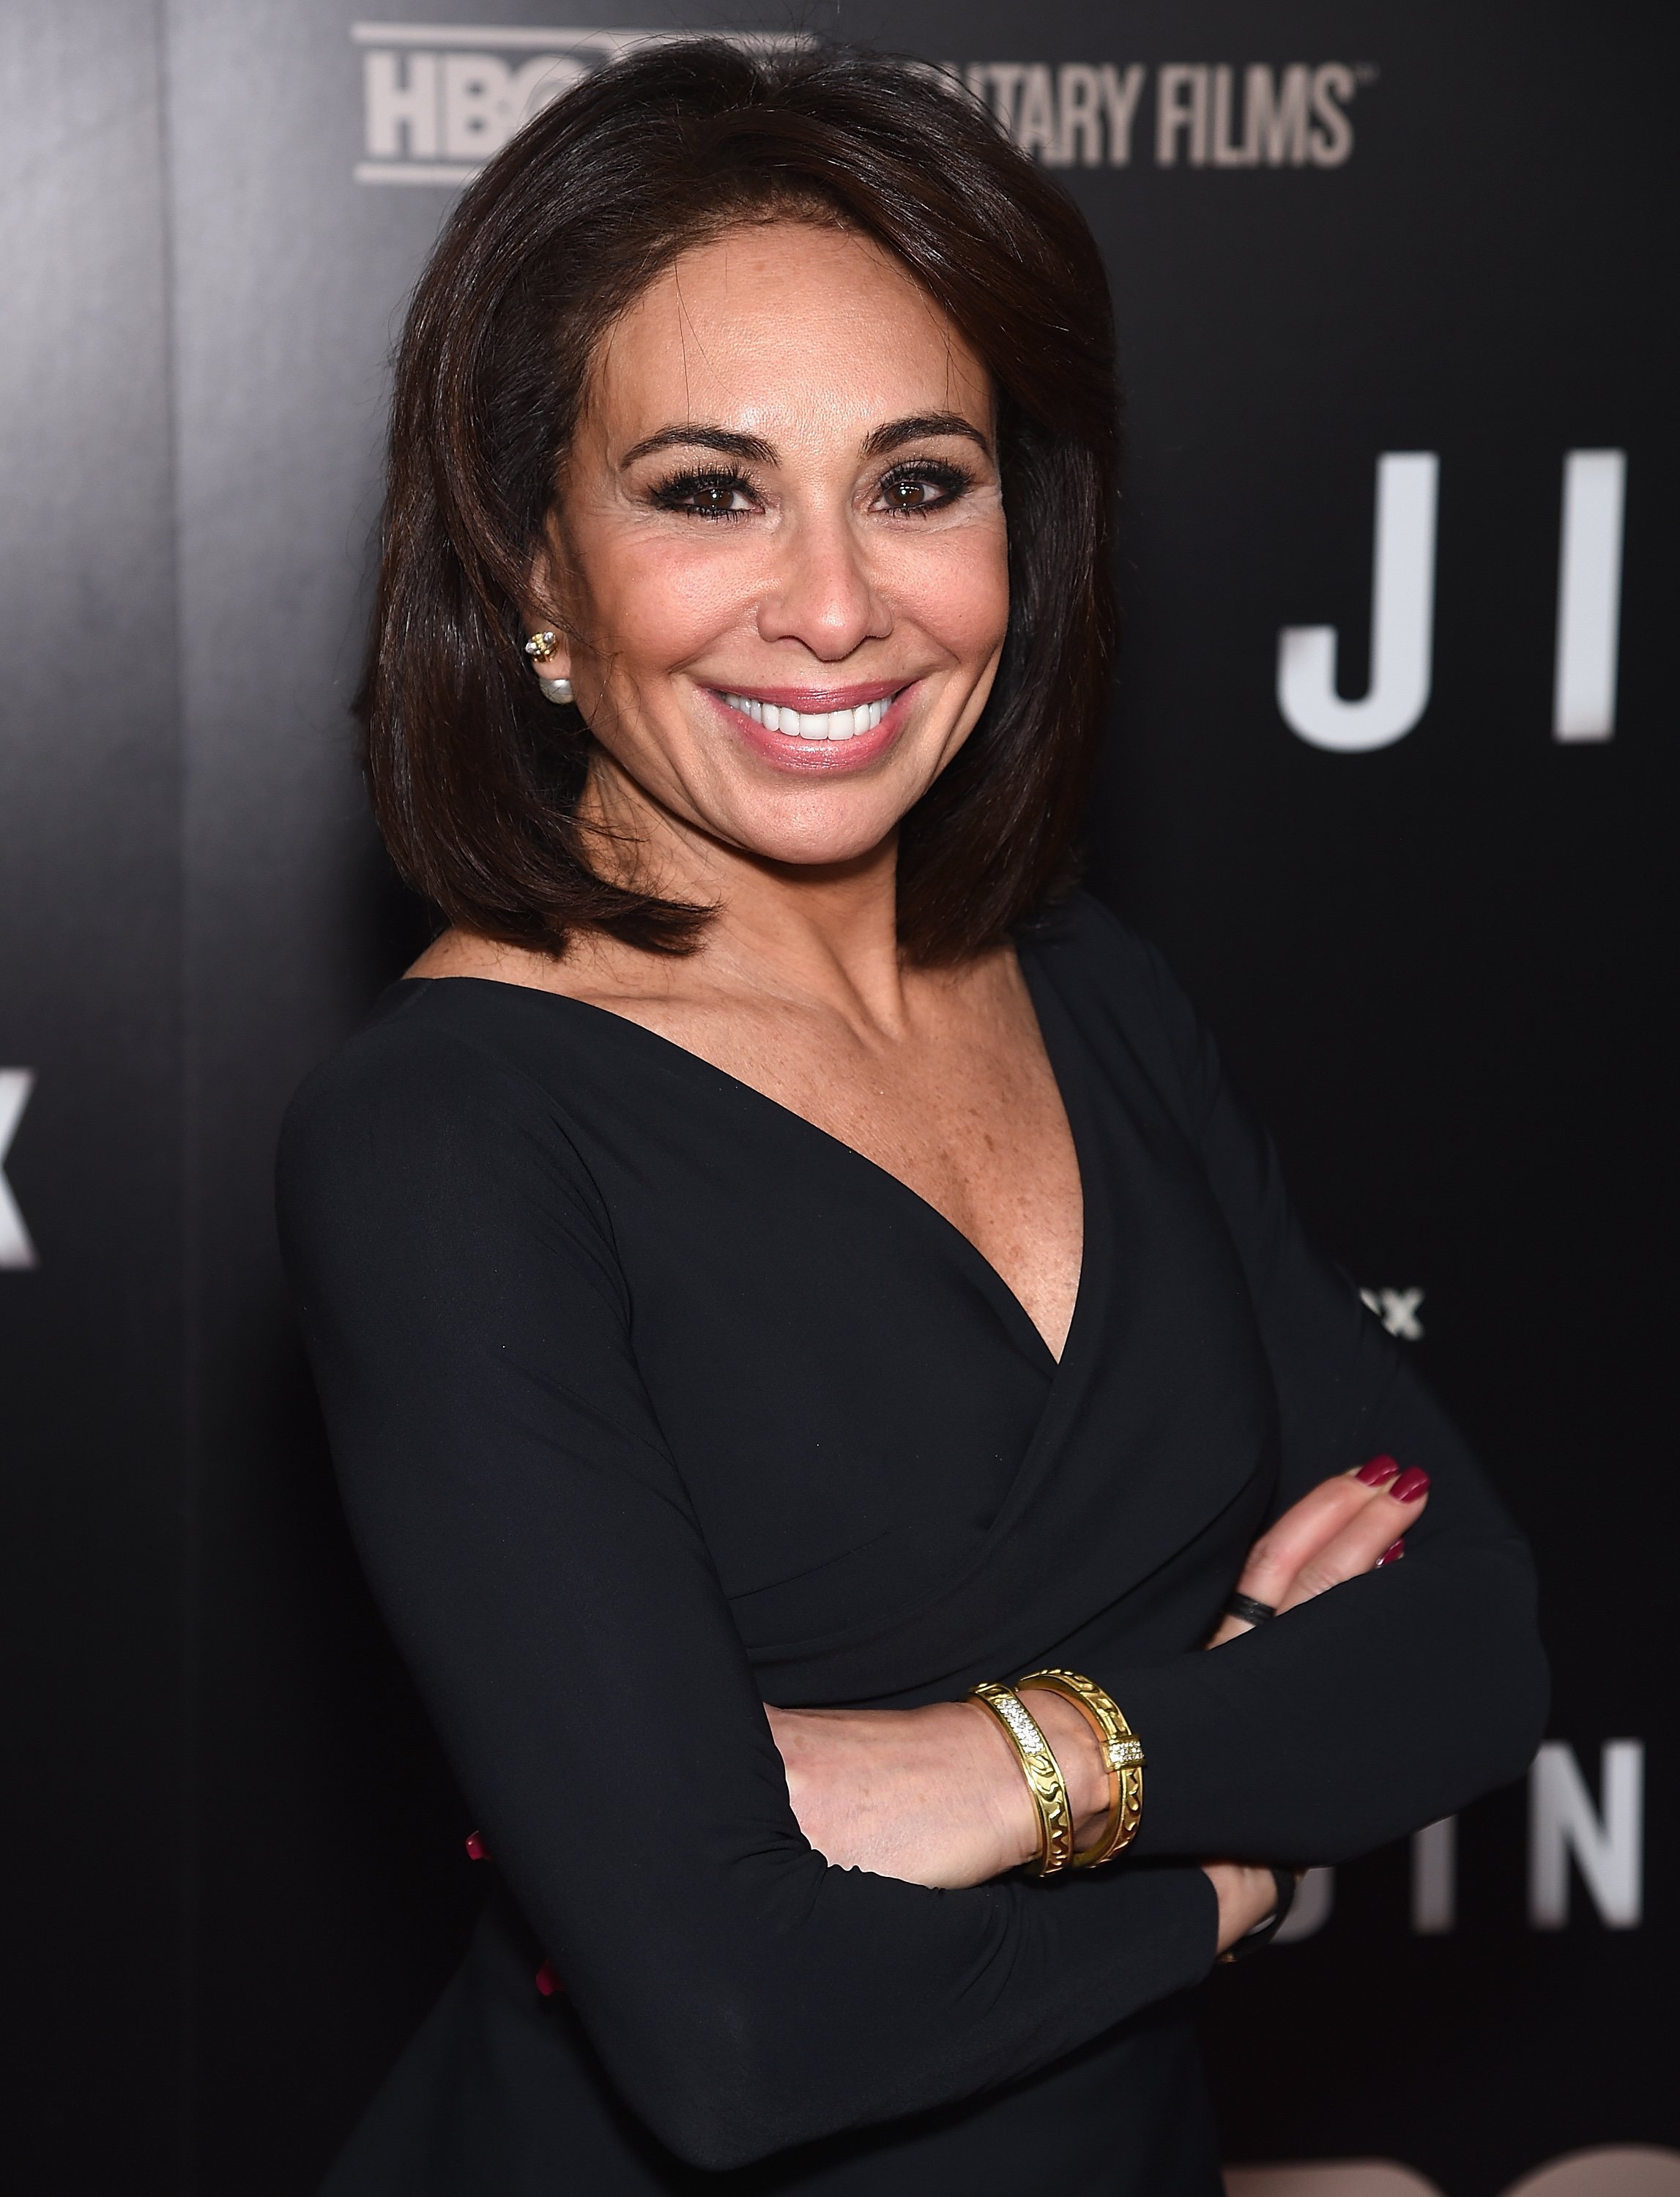 Jeanine Pirro at the premiere of "The Jinx" in New York City | Photo: Getty Images